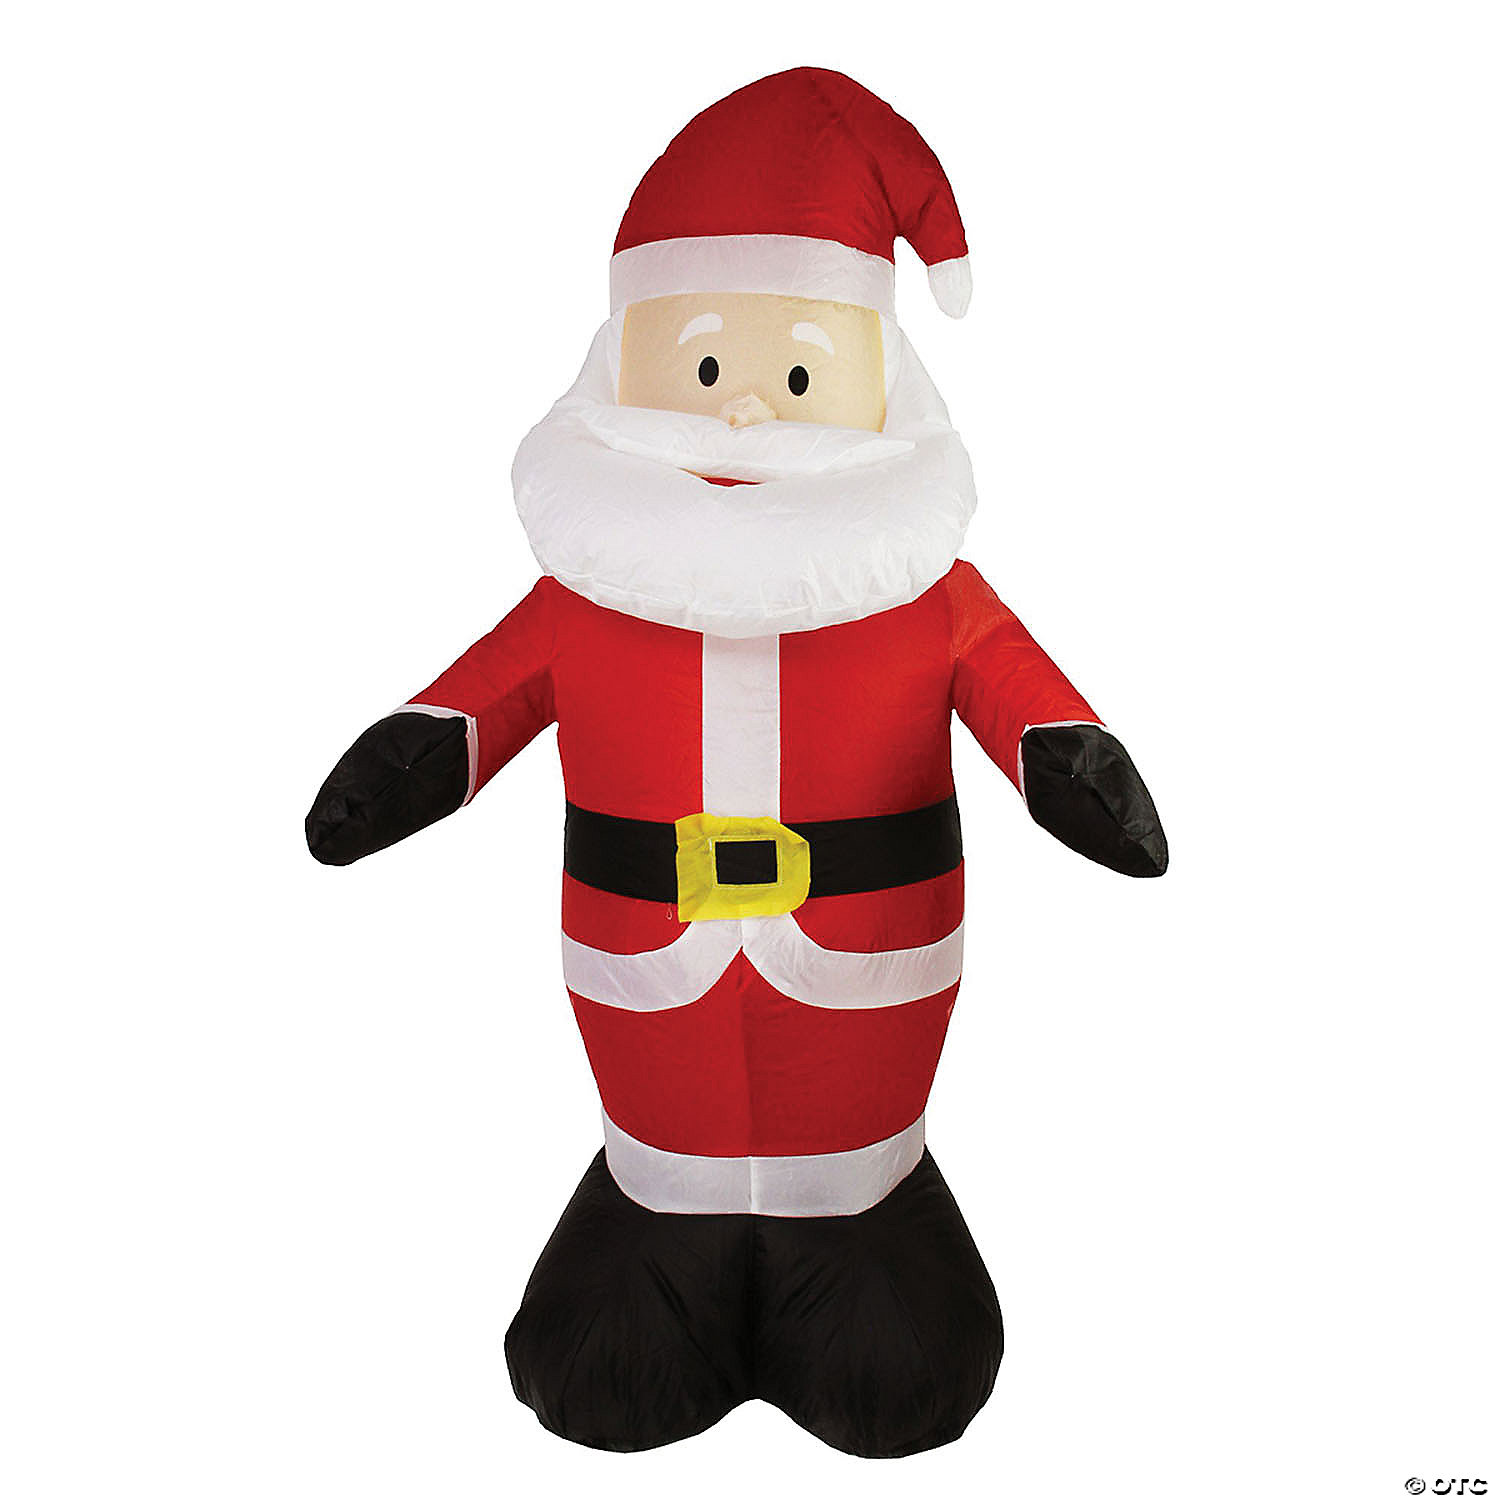 Now SD27155-7FT, 7 GOOSH Christmas Masters 7 Foot Inflatable Santa Claus Holding a Gift Present LED Lights Indoor Outdoor Yard Lawn Decoration Cute Fun Xmas Holiday Blow Up Party Display